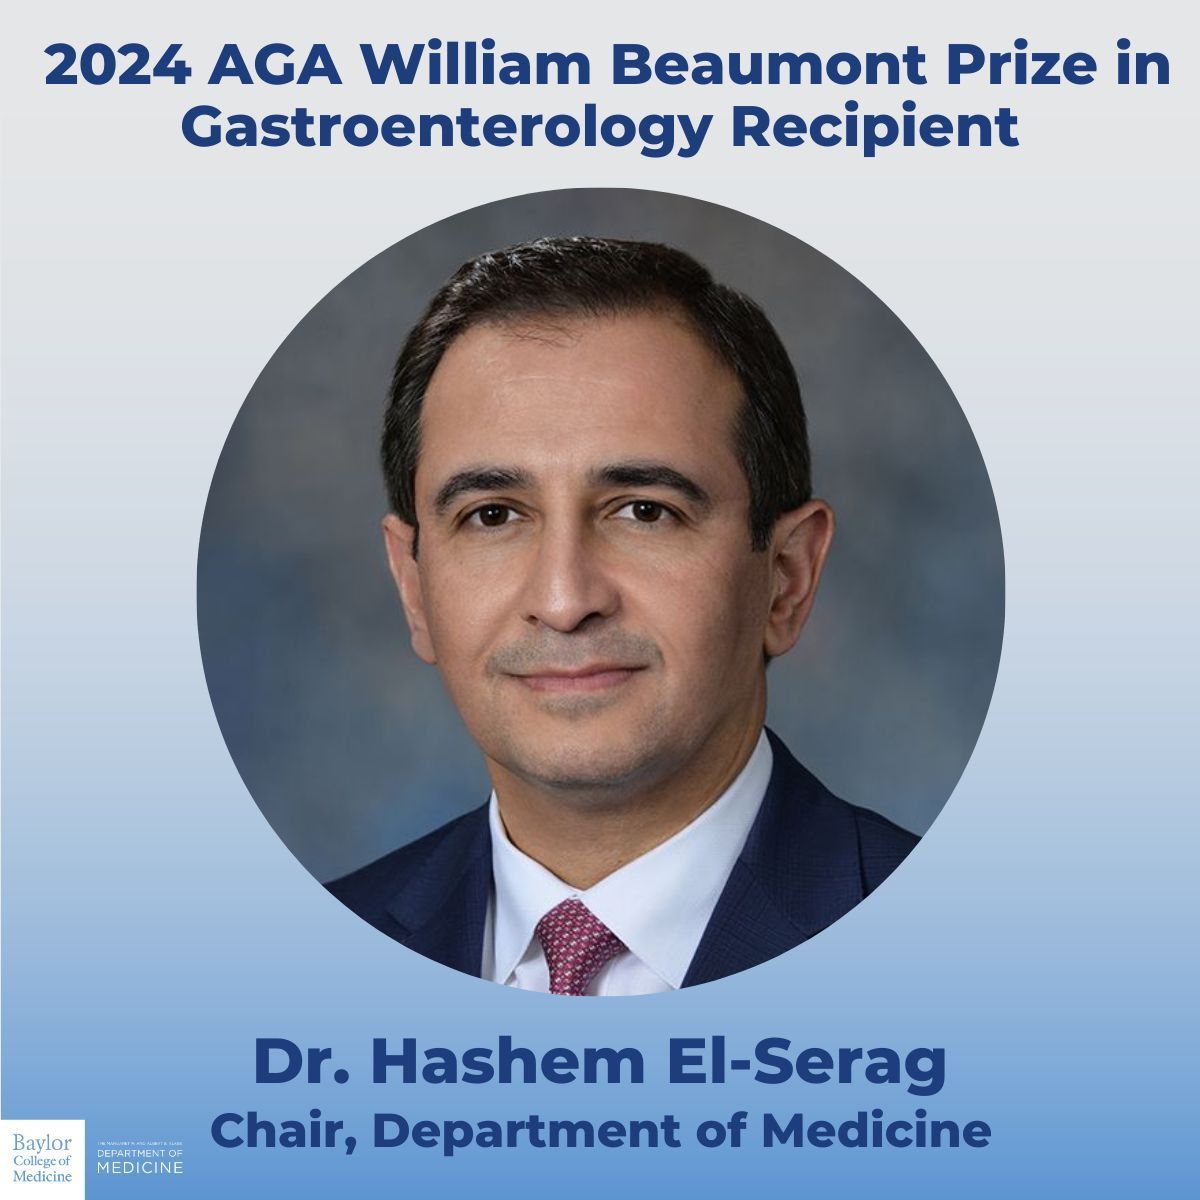 Congratulations to our Chair, Dr. Hashem El-Serag on receiving the 2024 AGA William Beaumont Prize in Gastroenterology! Your contributions to gastroenterological research continue to inspire and advance the field. 👏🏆 #BCMDoM